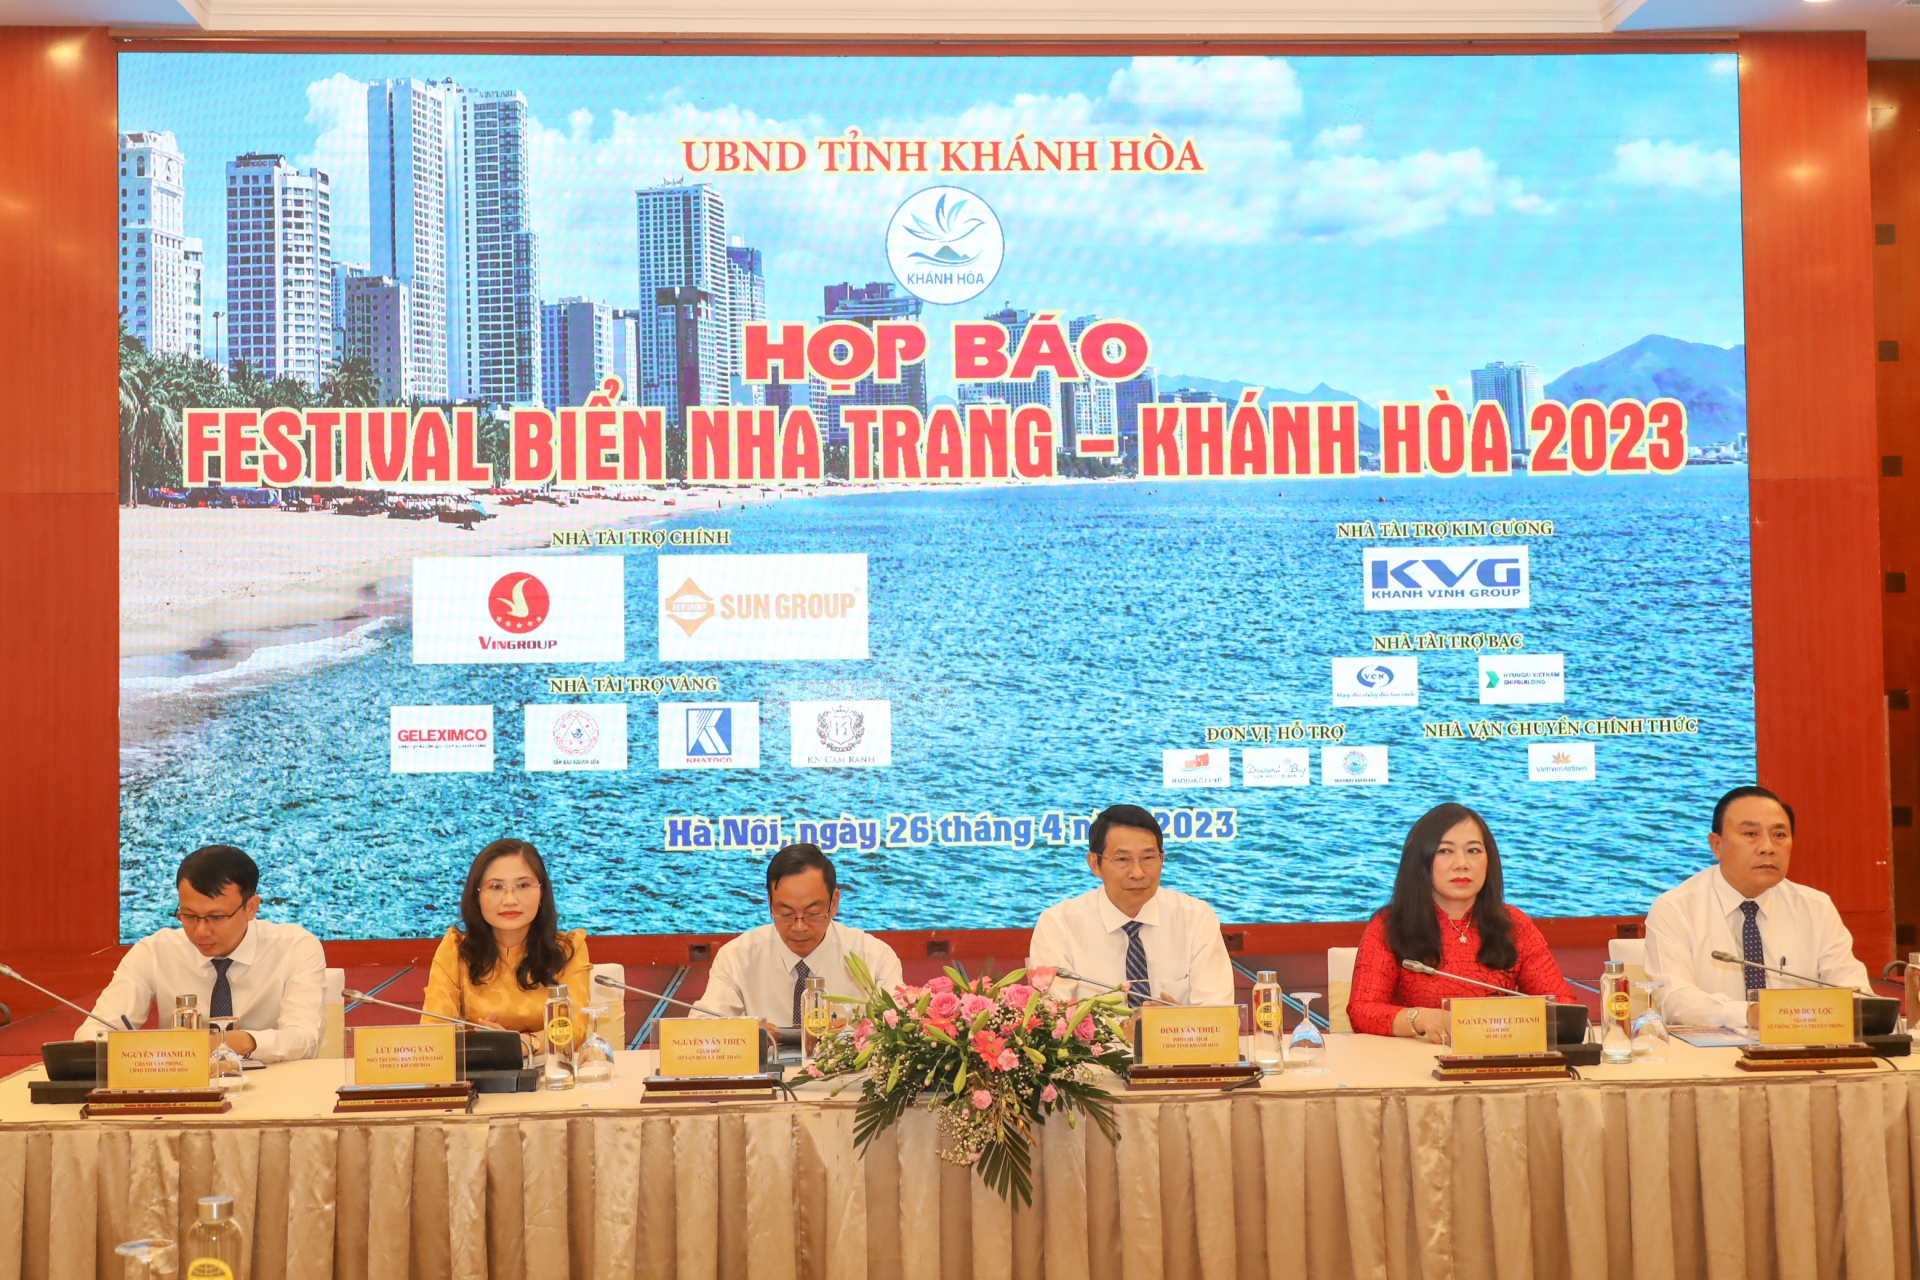 Leaderships of Khanh Hoa Provincial Peoples Committee, departments and sectors chair the press conference about Sea Festival 2023 in Hanoi

